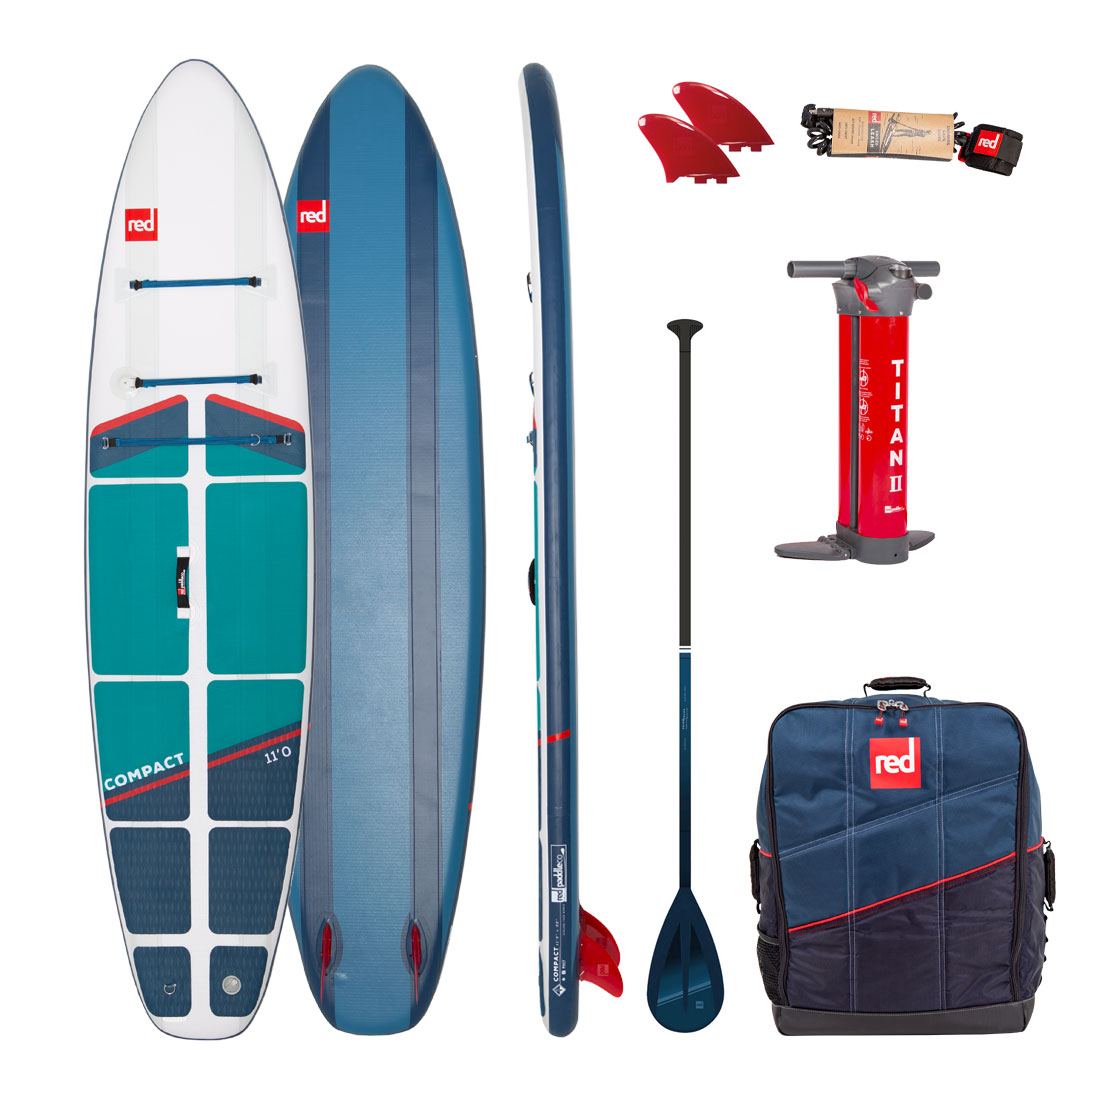 2022-red-paddle-co-11-compact-travel-inflatable-sup-paddle-board-touring-green-water-sports